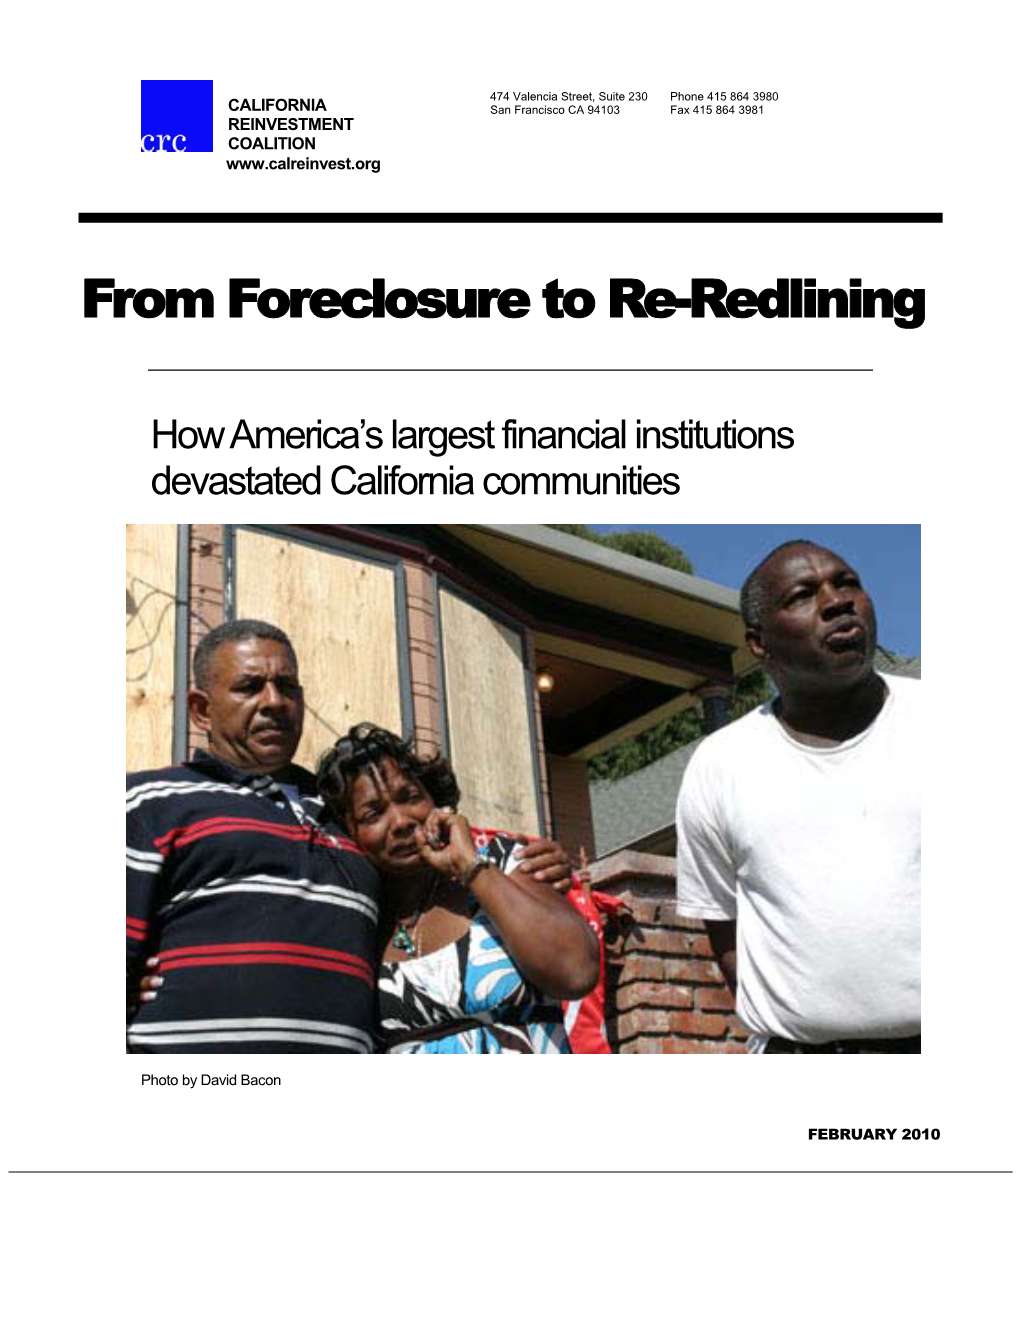 From Foreclosure to Re-Redlining